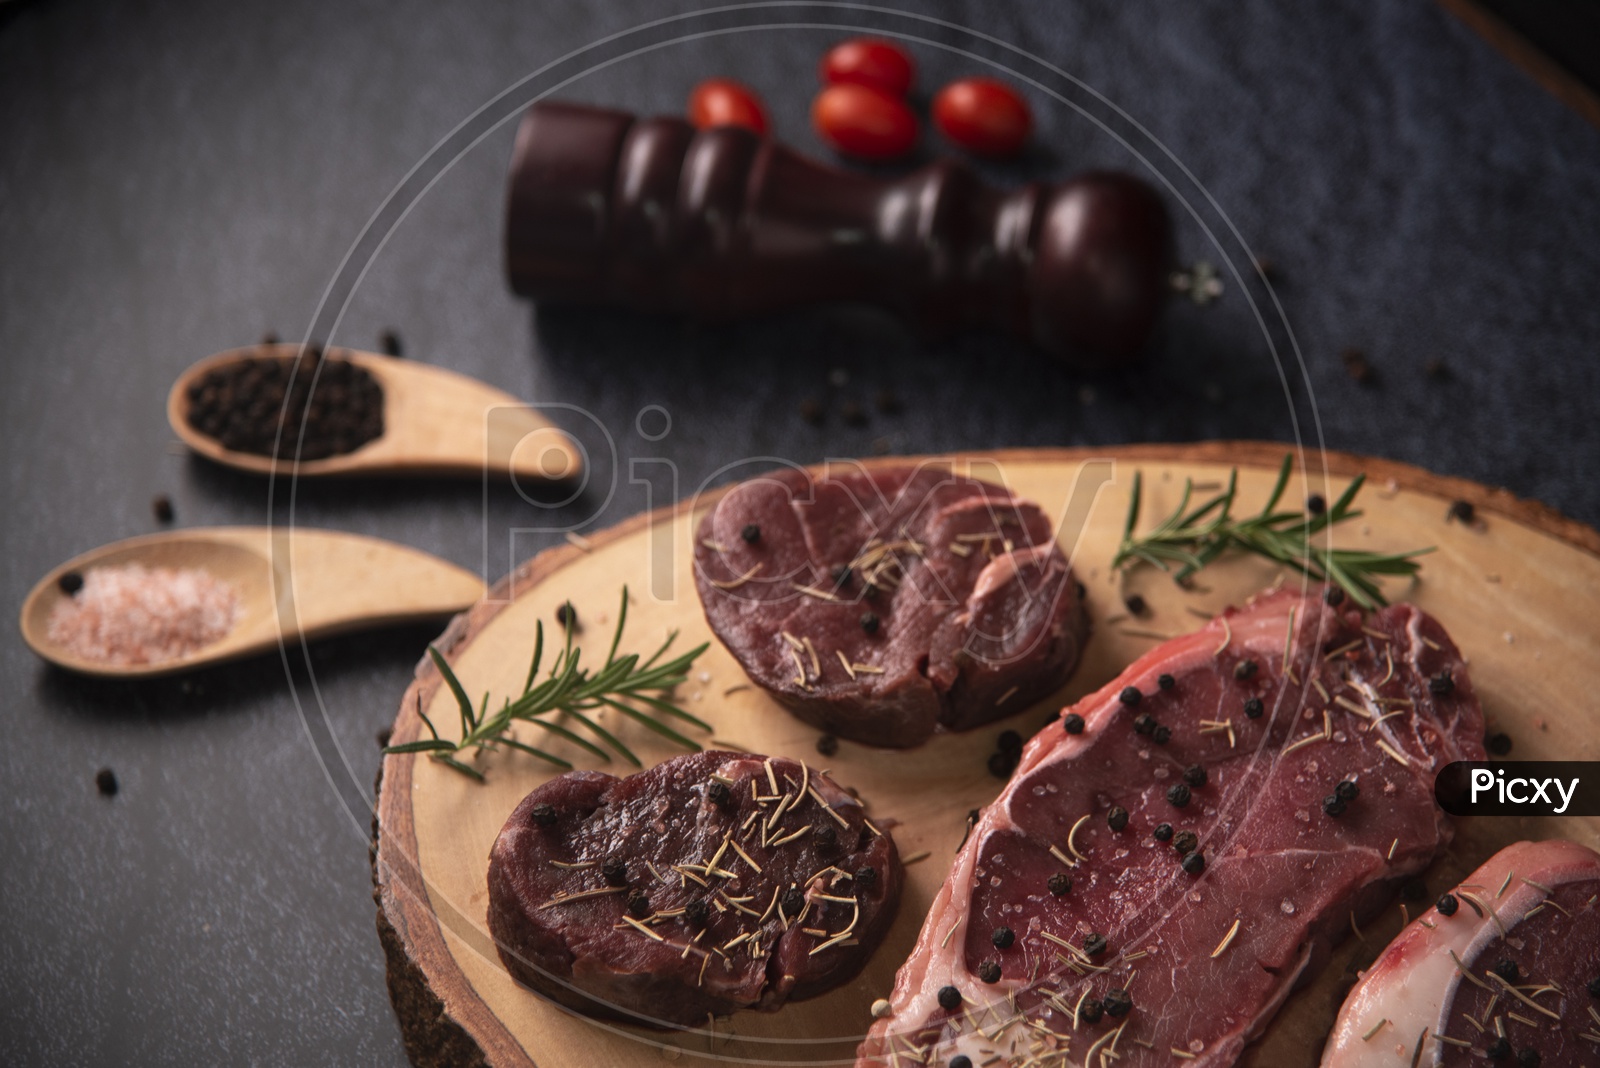 Pieces of Raw beef fillet steaks with spices on wooden background